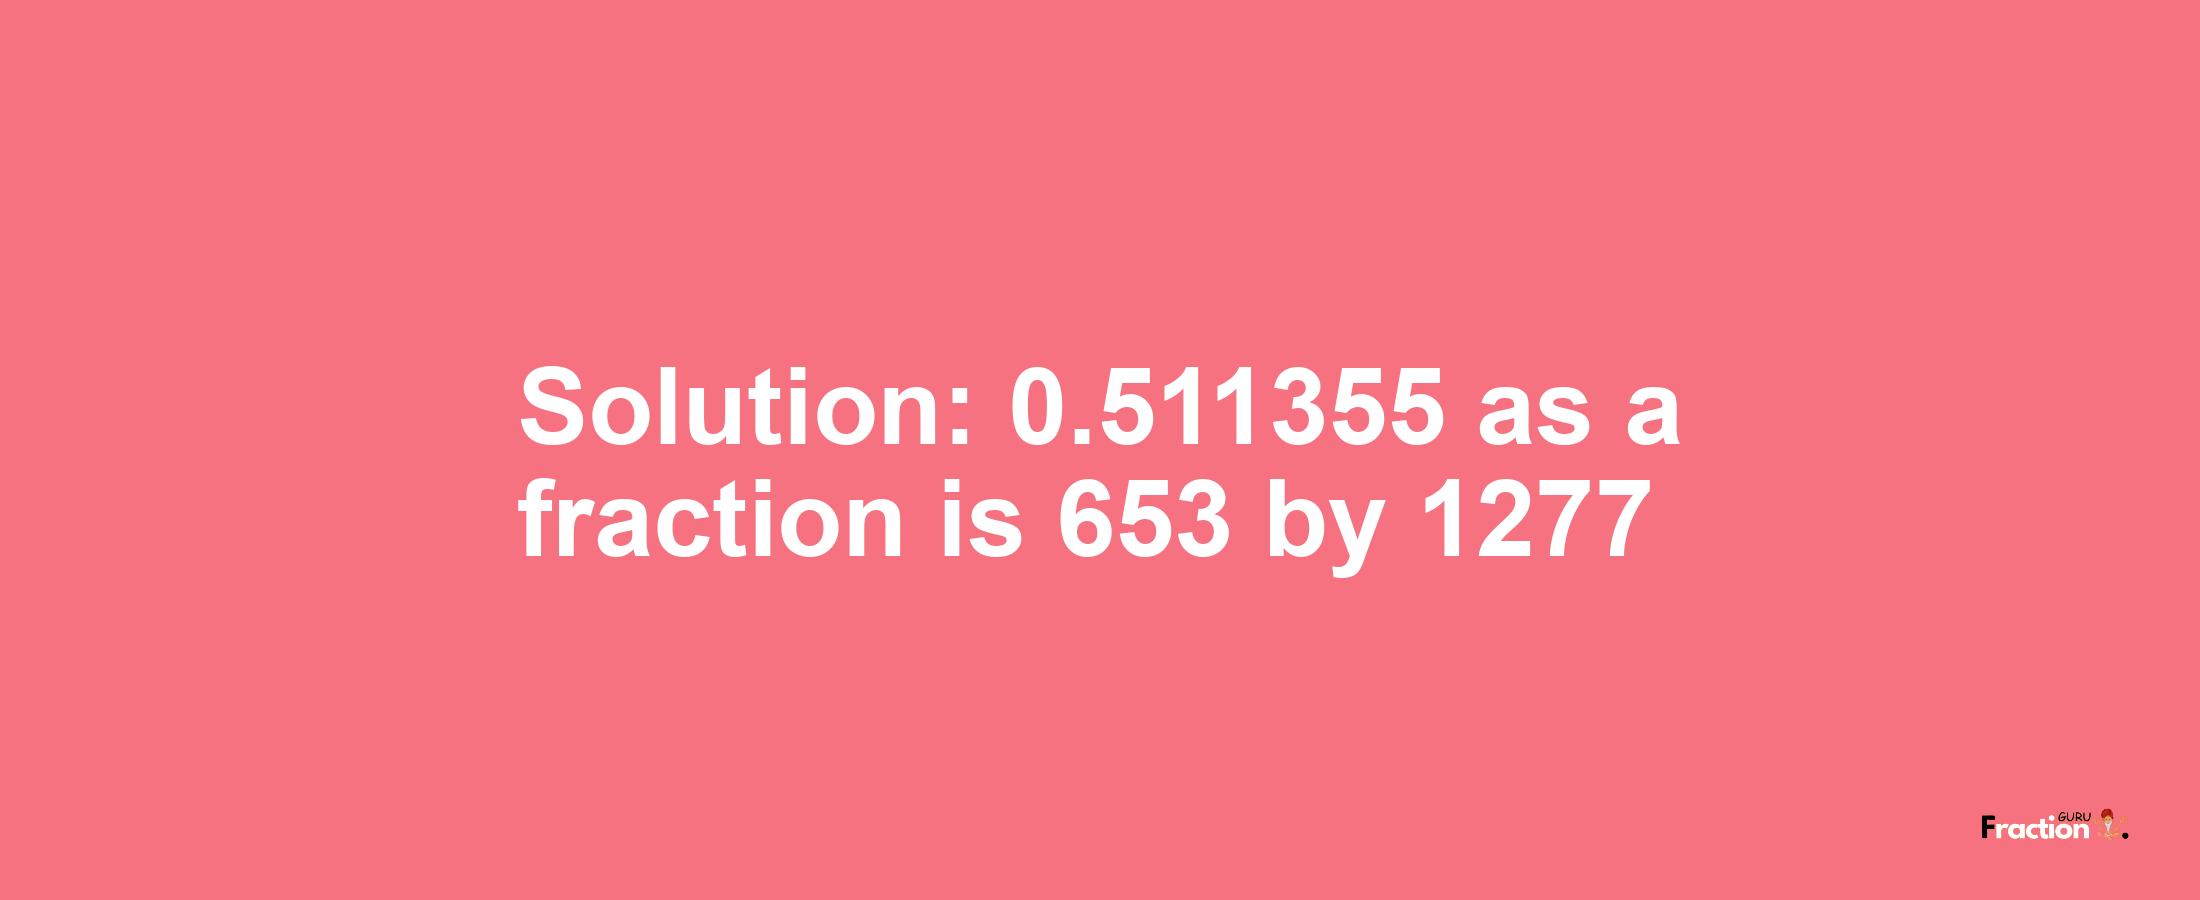 Solution:0.511355 as a fraction is 653/1277